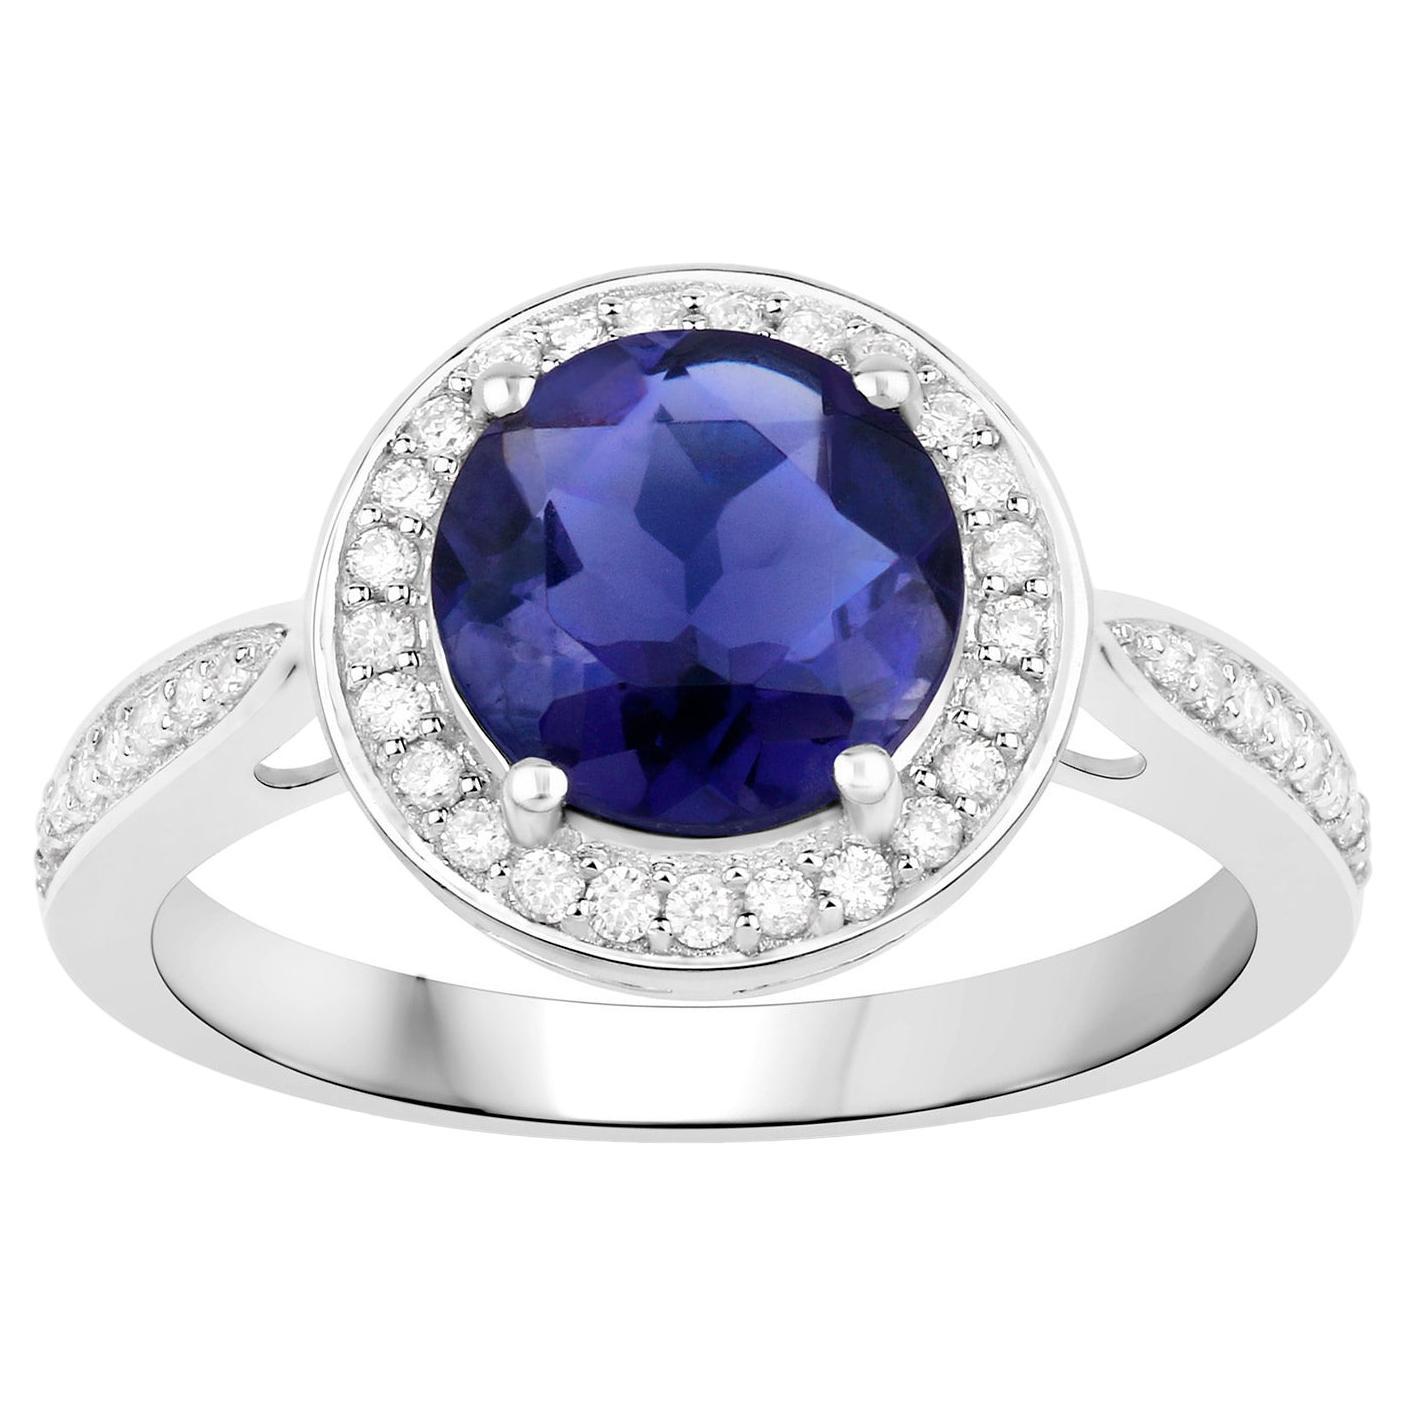 Iolite Ring With Diamonds 1.79 Carats 14K White Gold For Sale